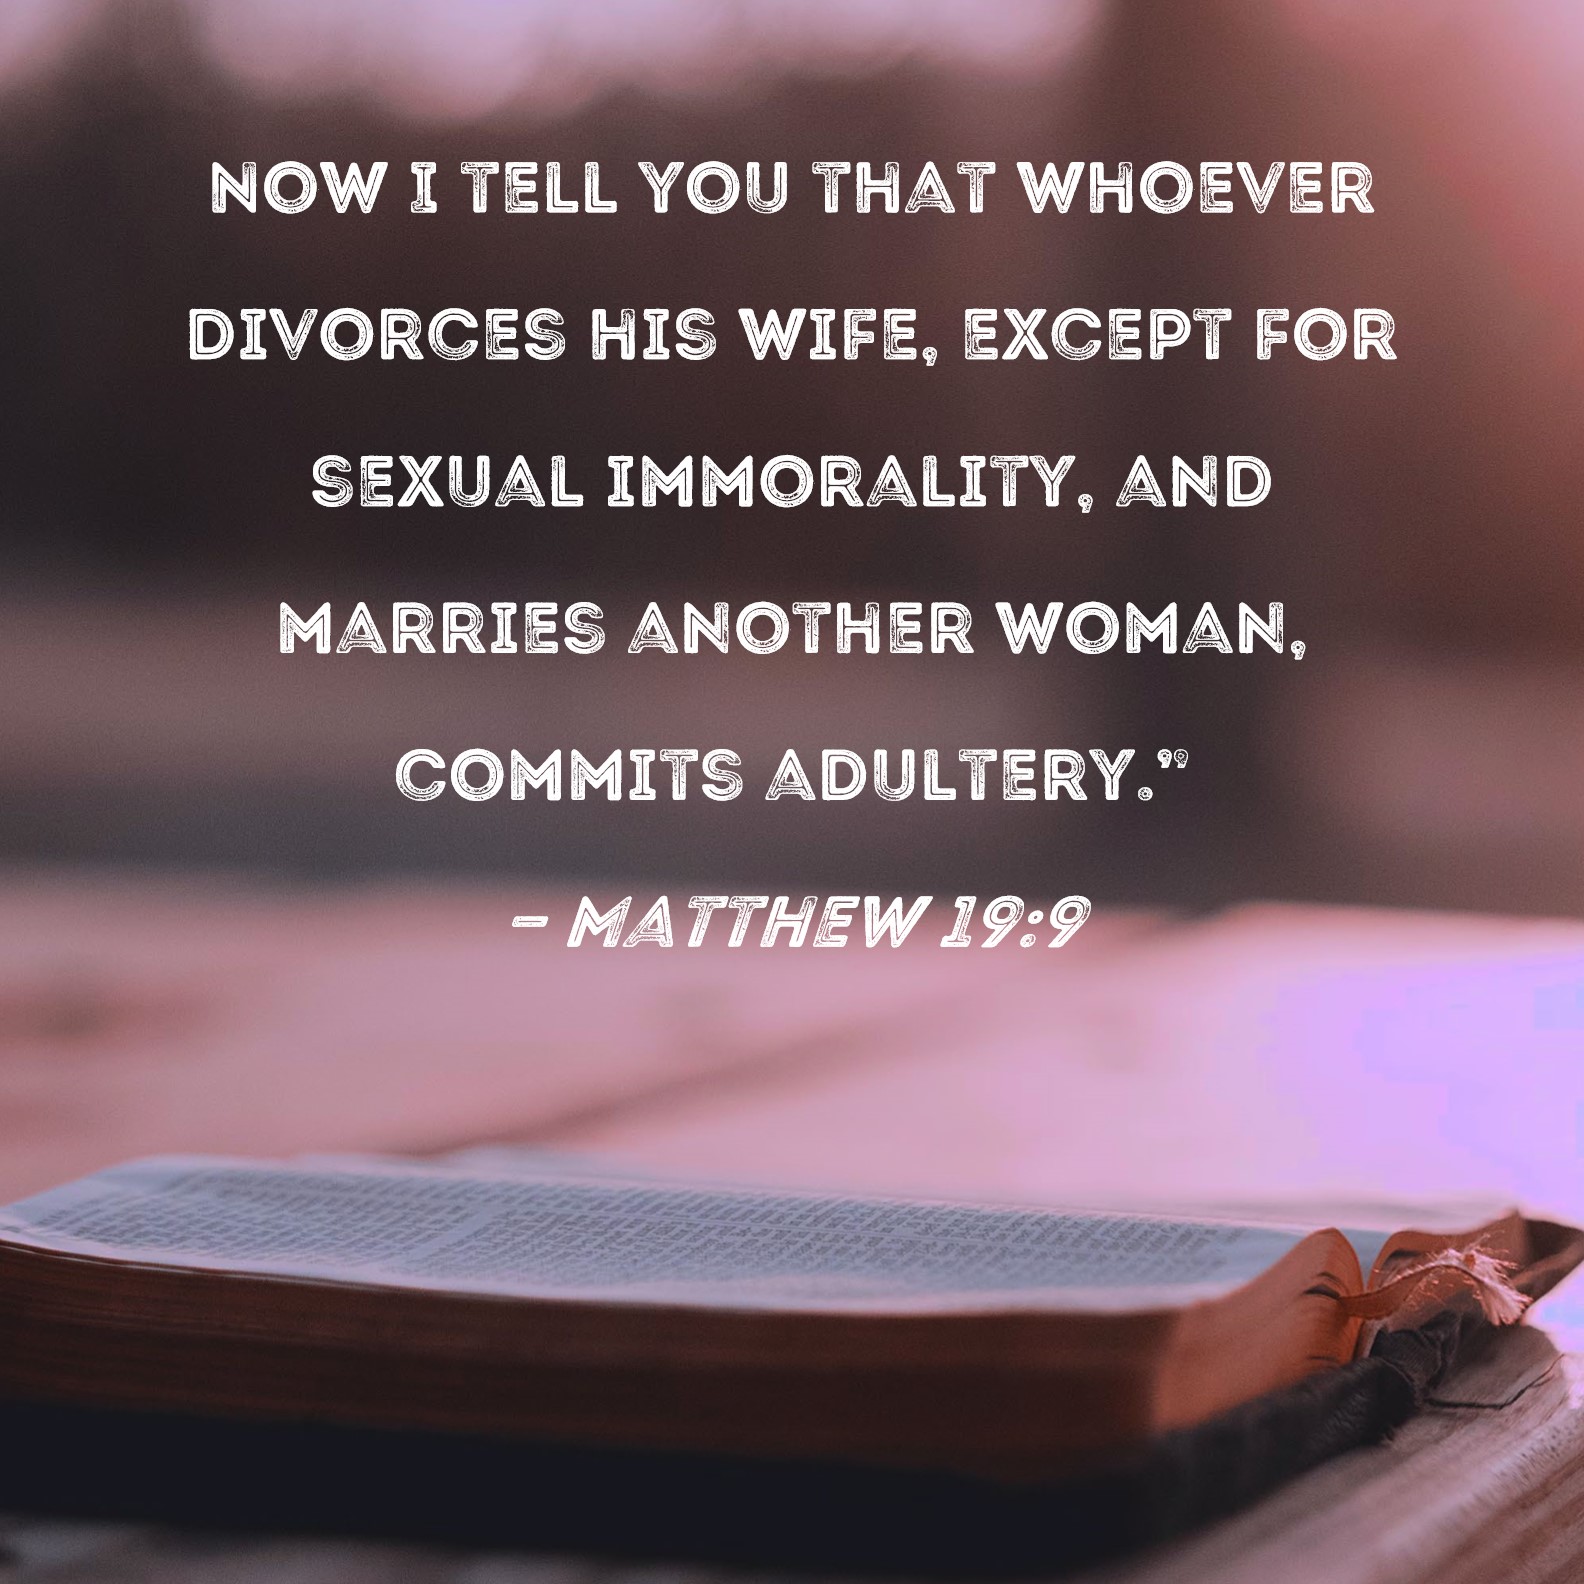 Matthew 199 Now I tell you that whoever divorces his wife, except for sexual immorality, and marries another woman, commits adultery./